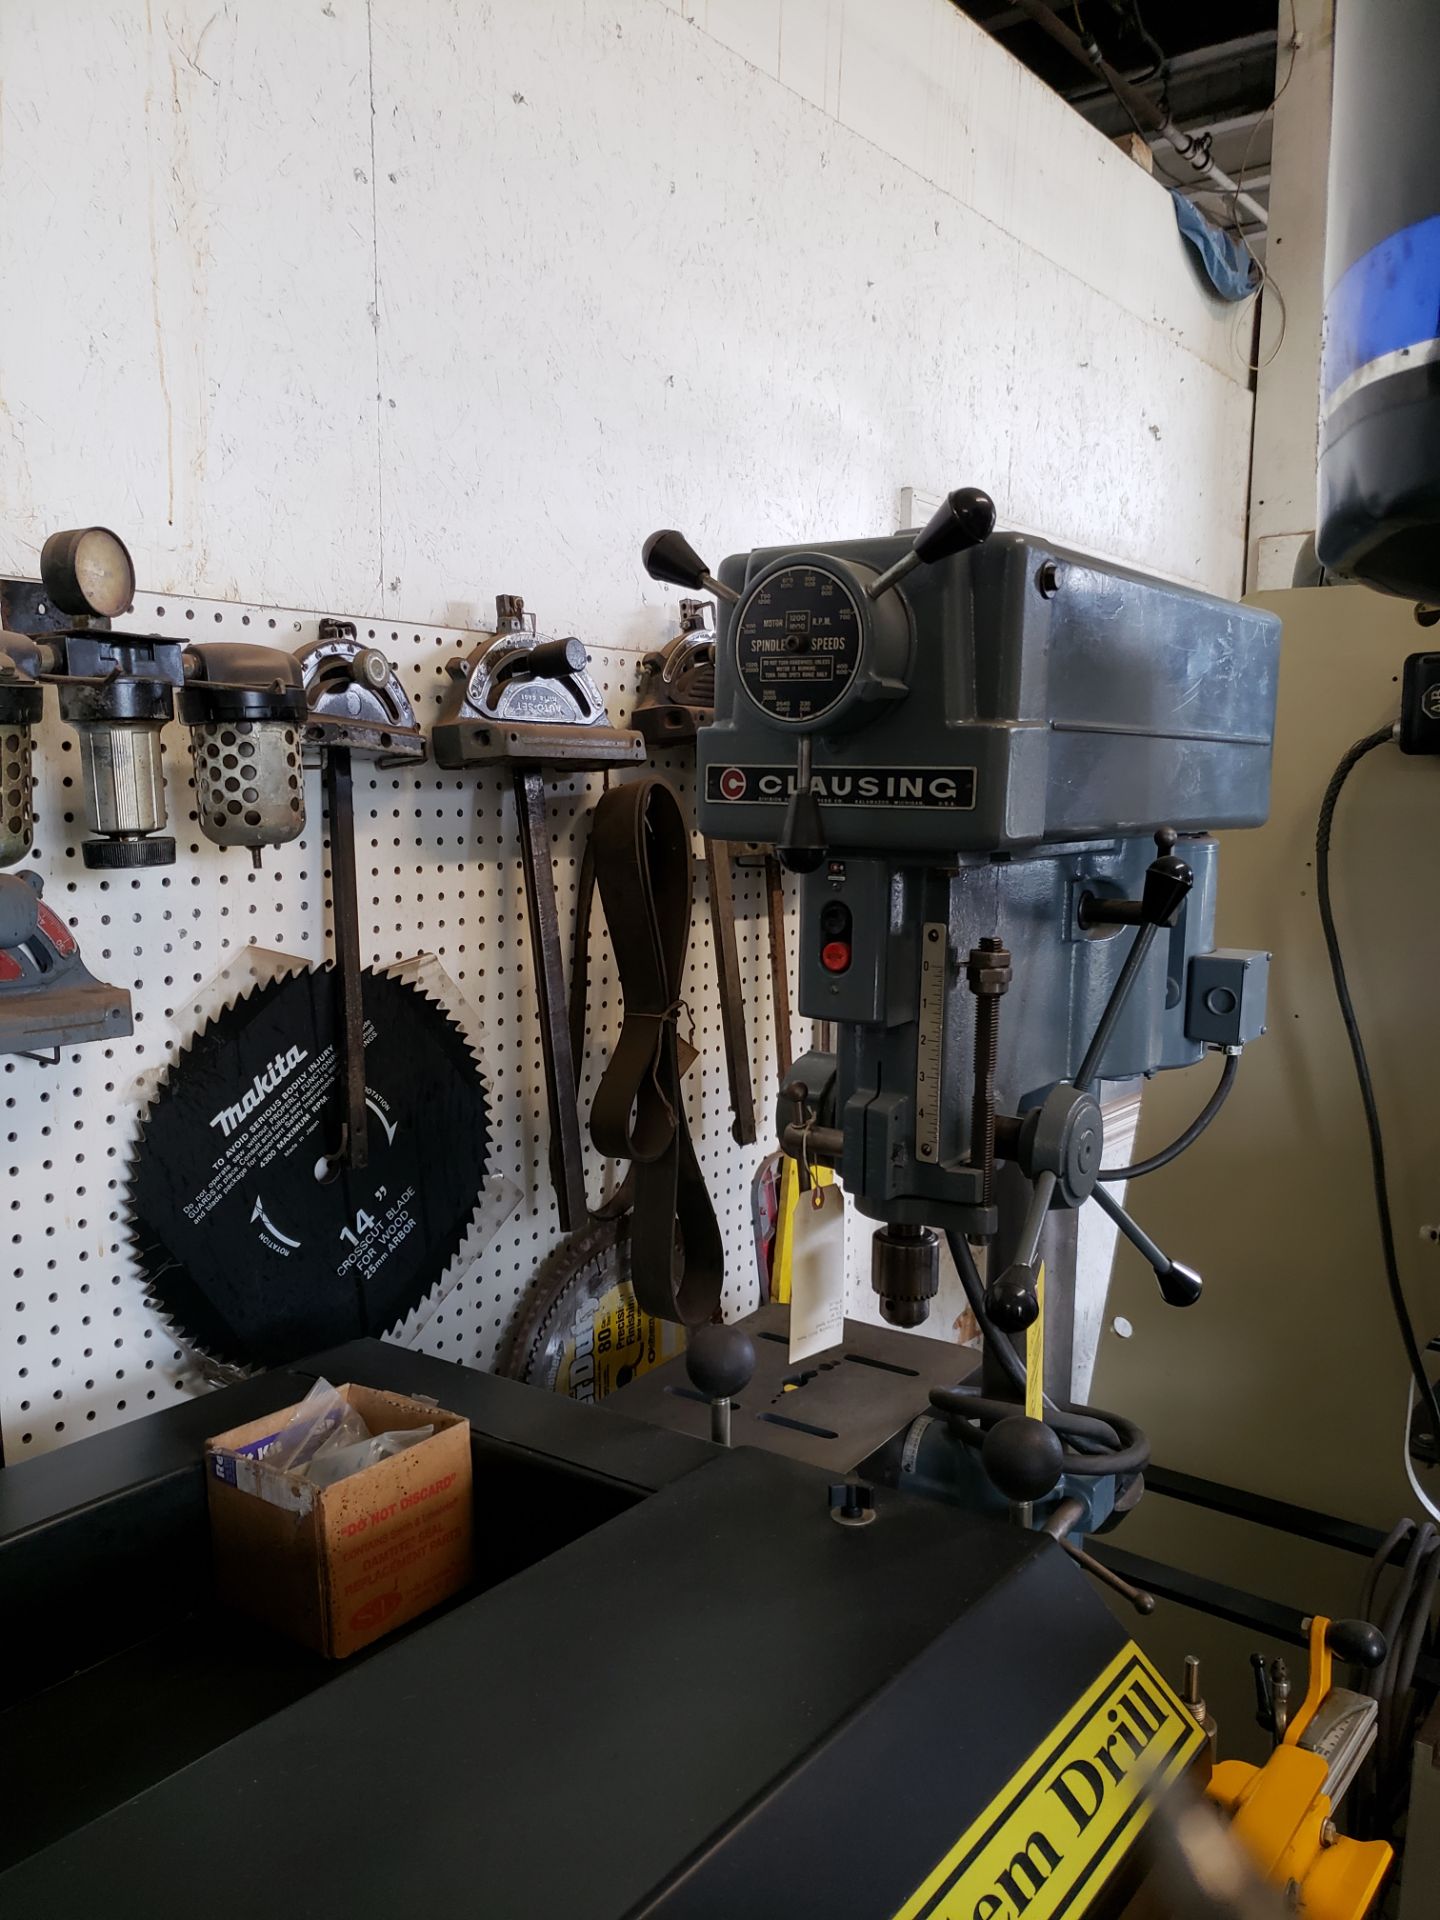 CLAUSING DRILL PRESS 15" VARIABLE SPEED ¾HP/3PH - Image 2 of 2